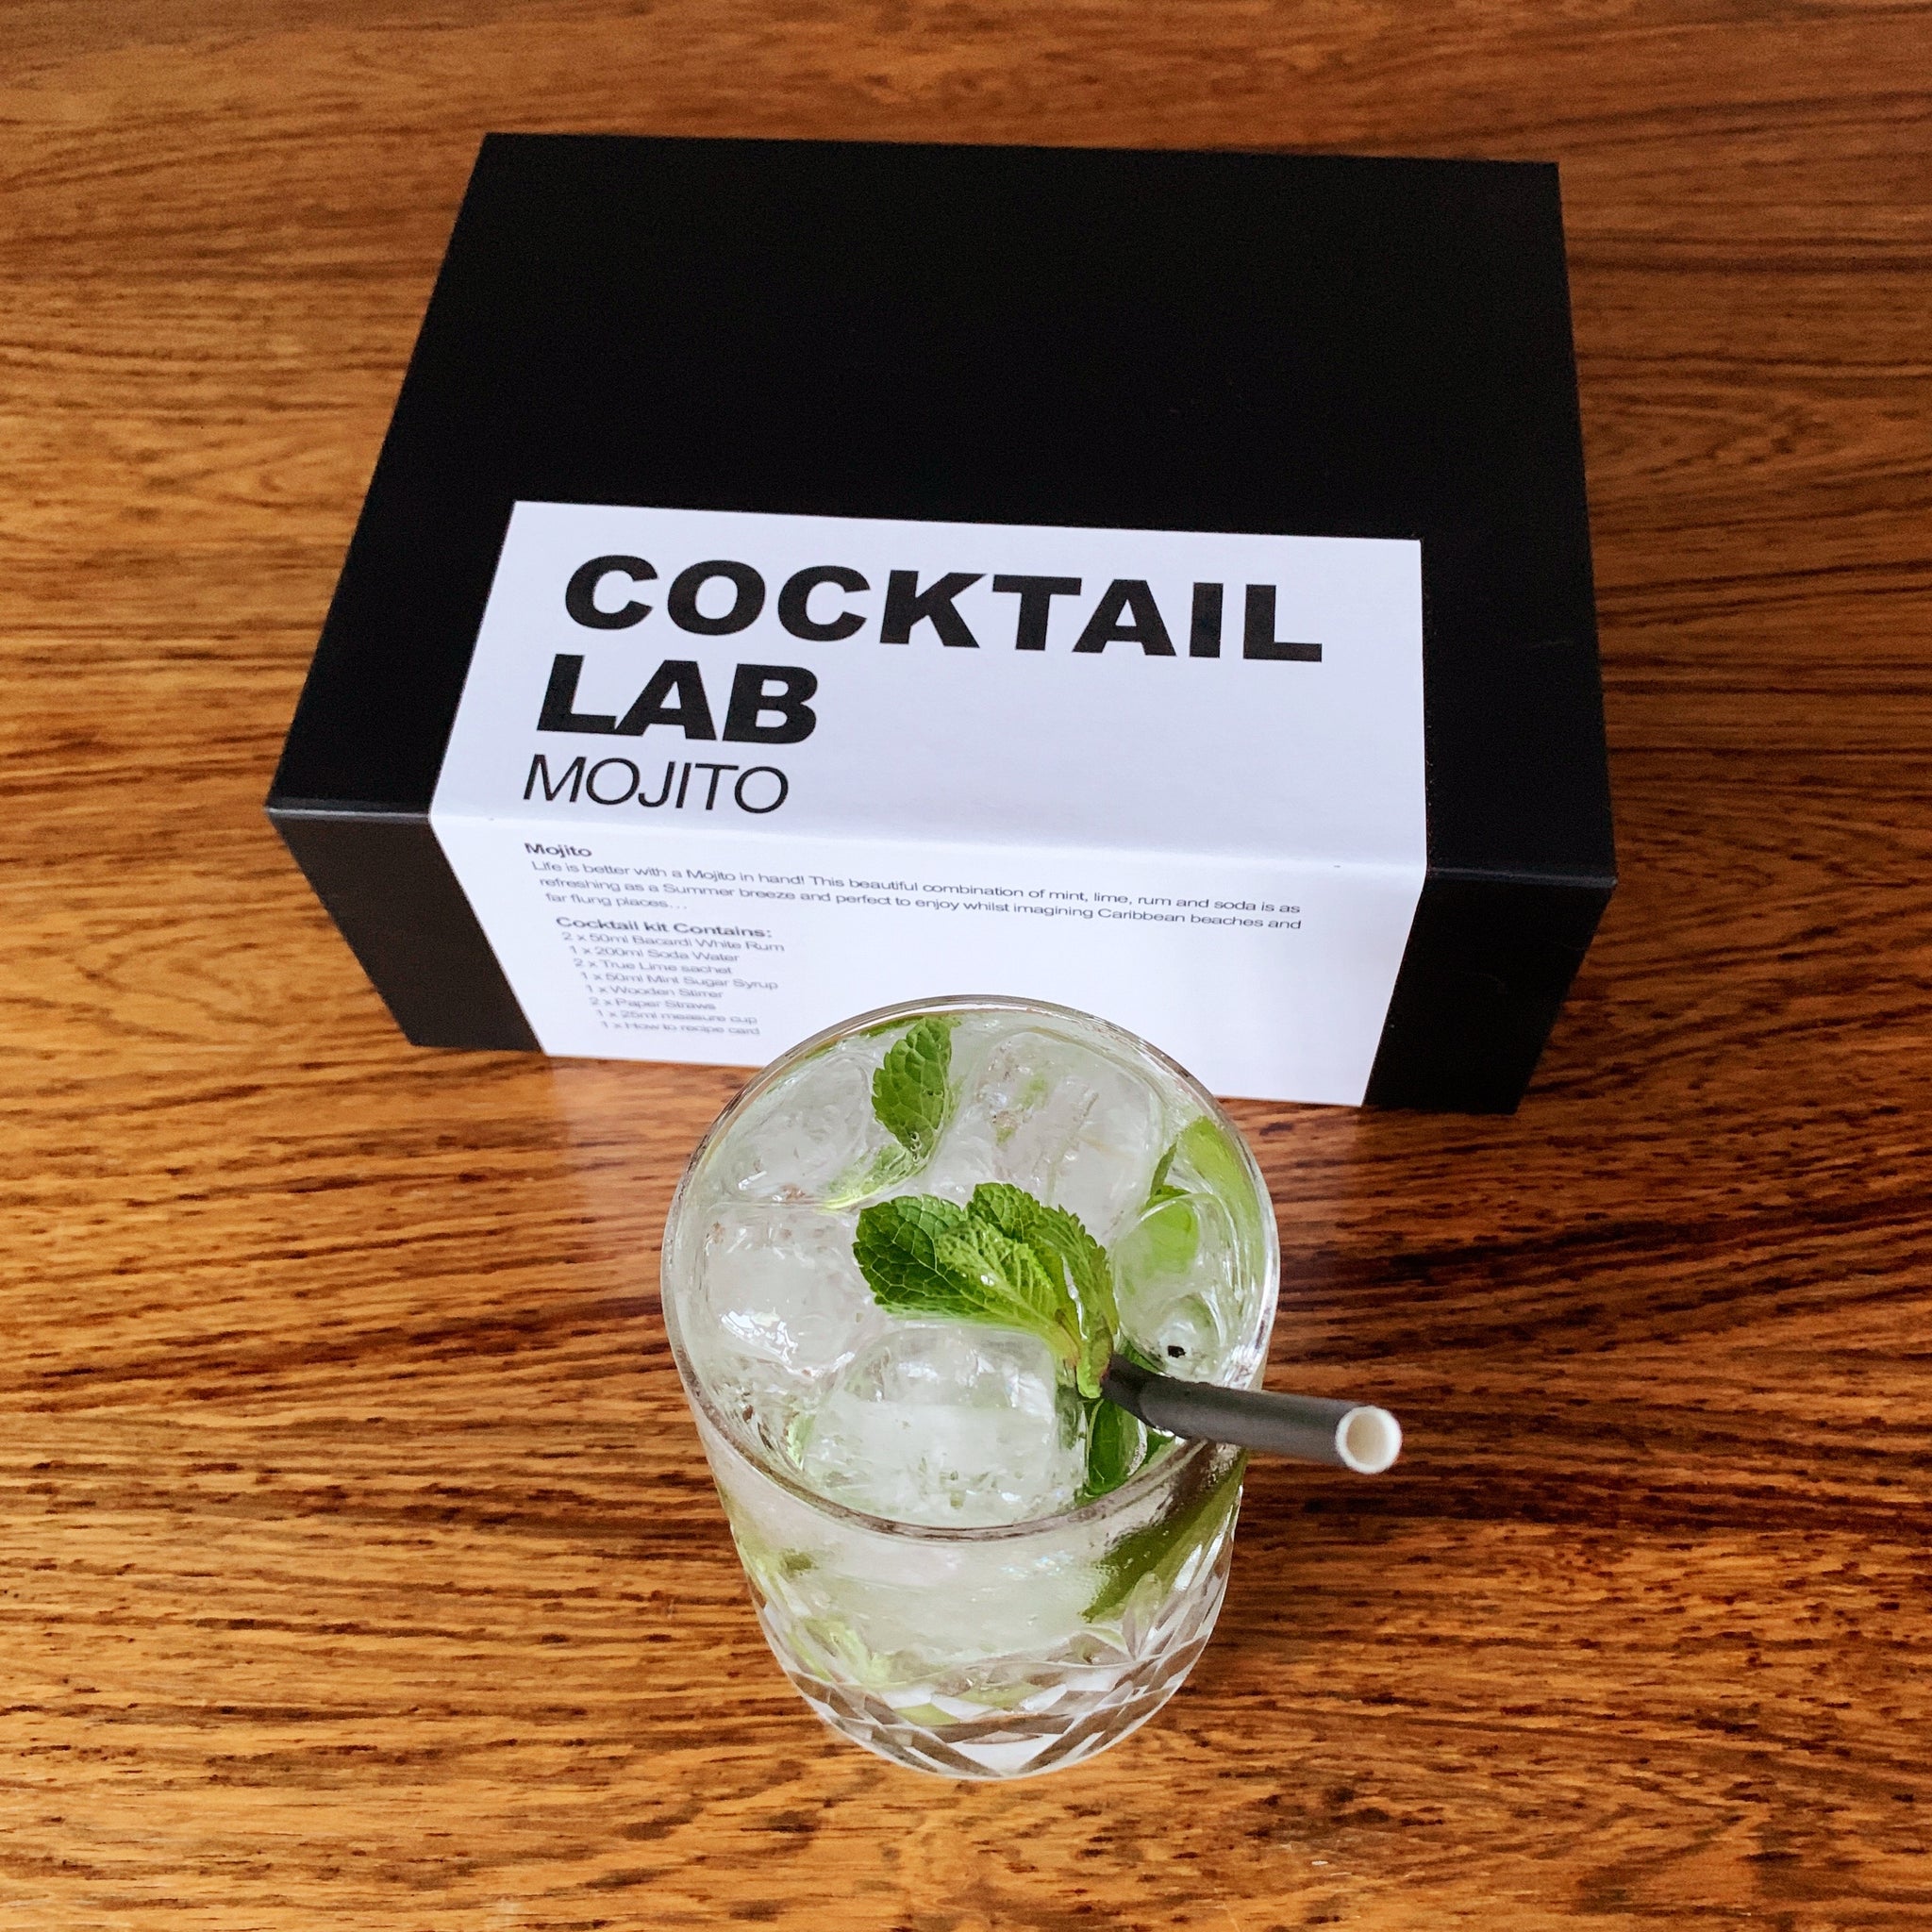 Introducing the world-famous Mojito Cocktail